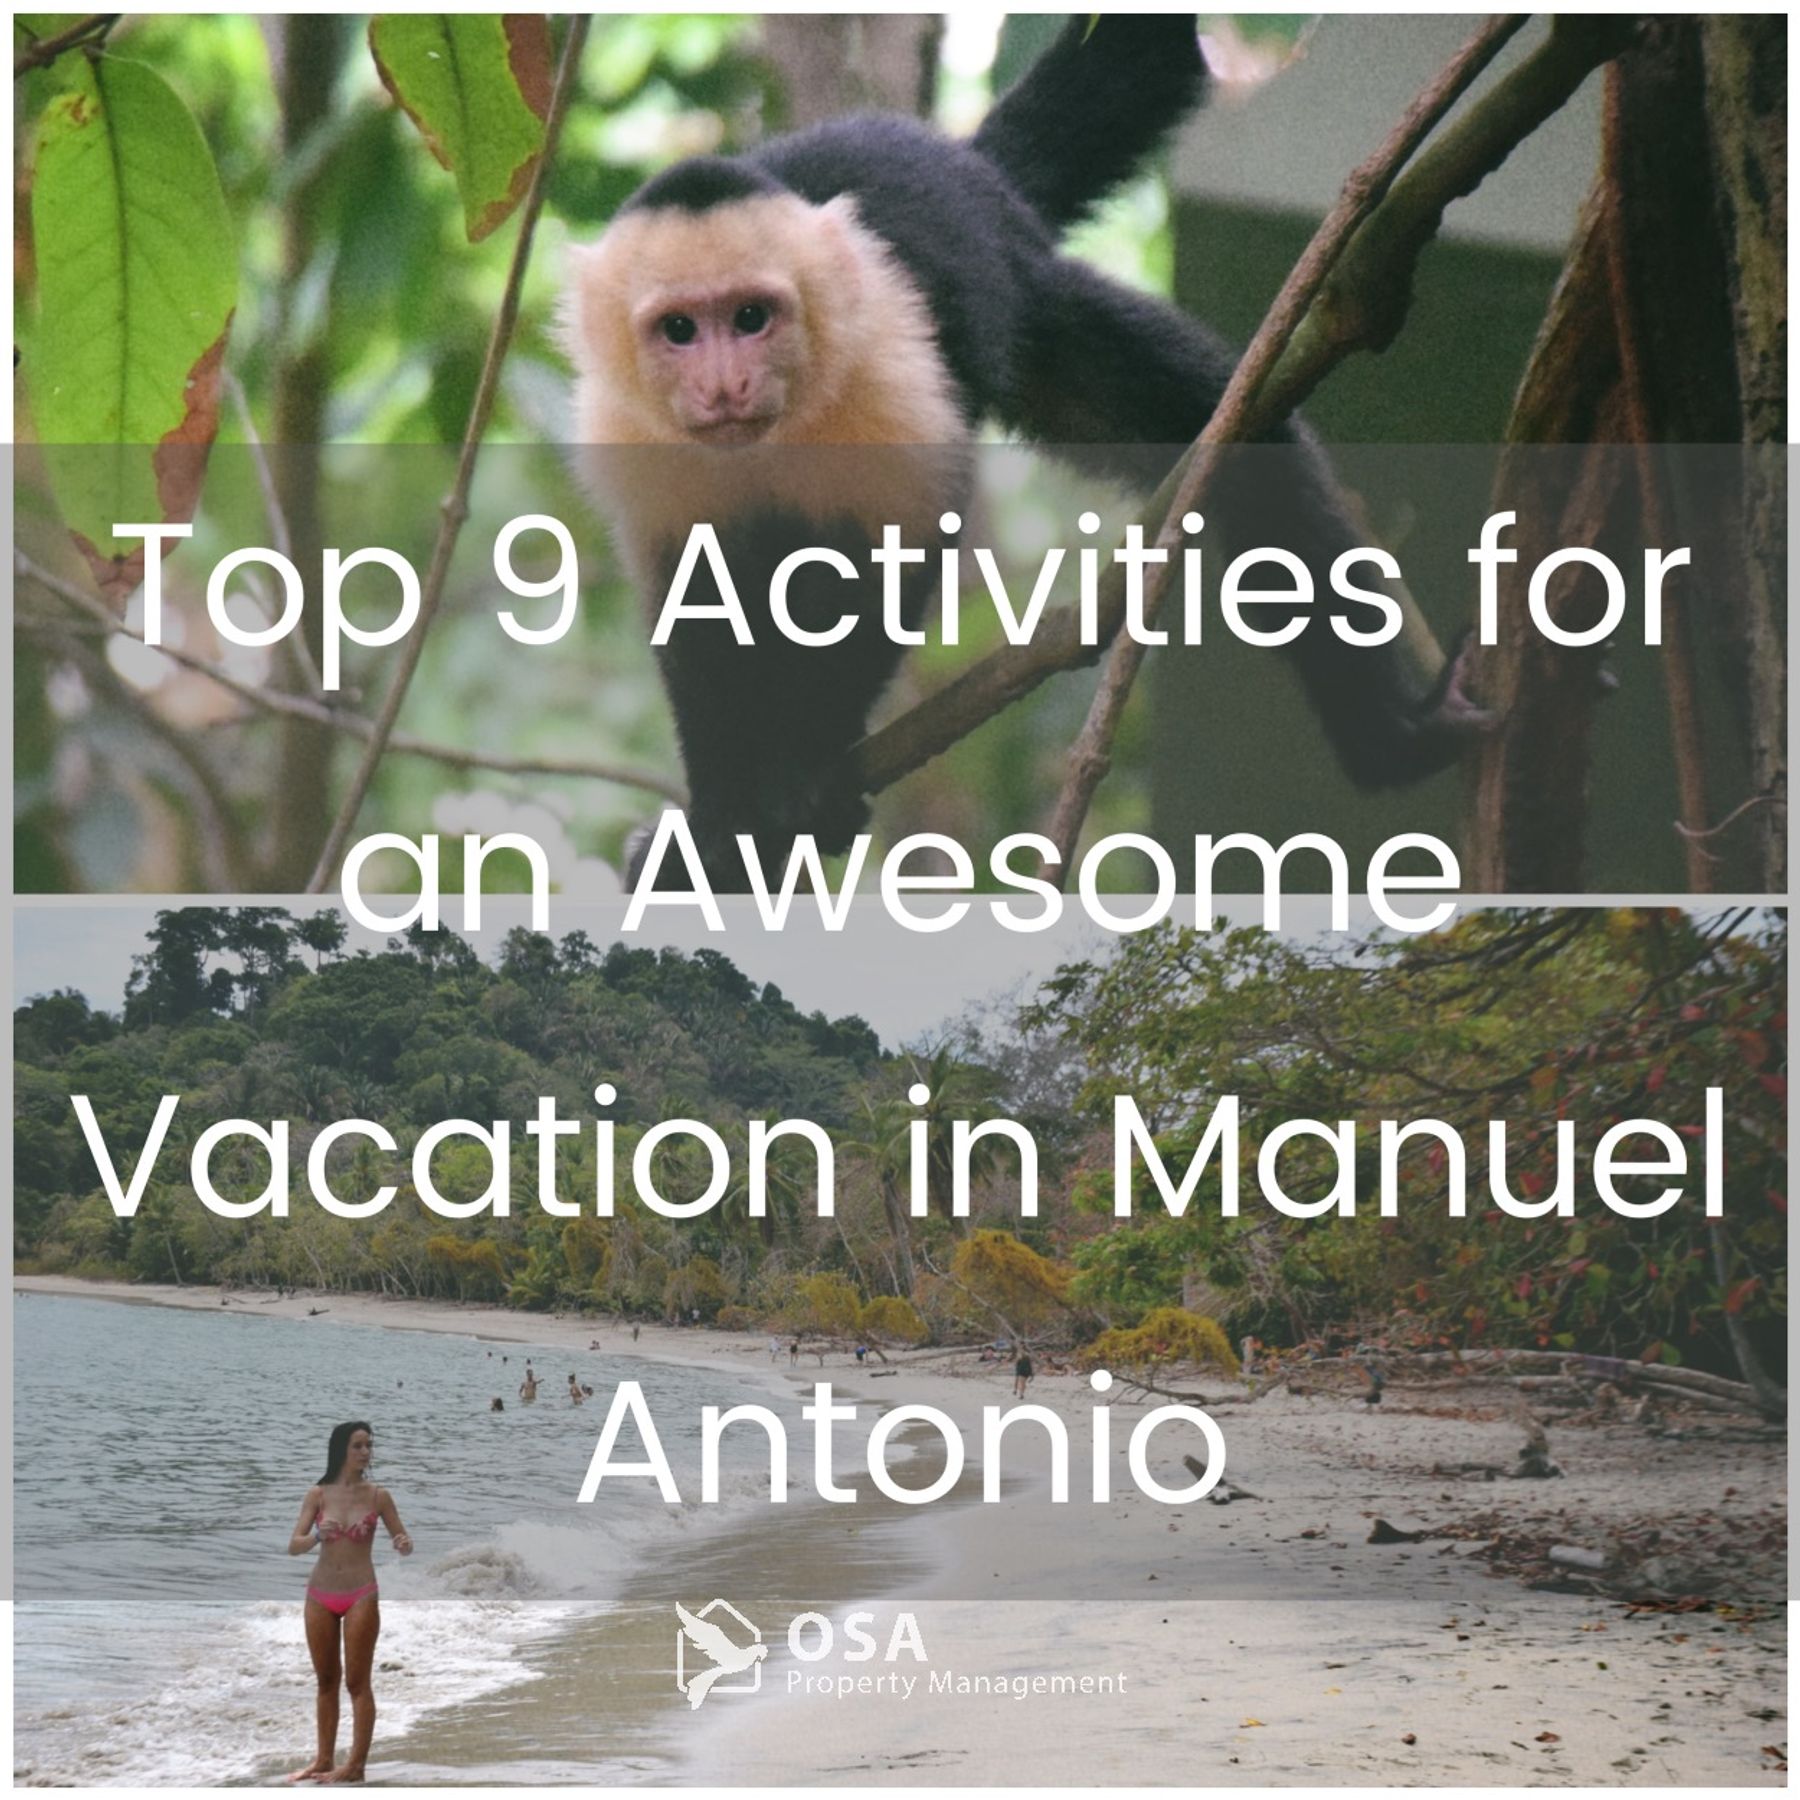 Top 9 Activities for an Awesome Vacation in Manuel Antonio